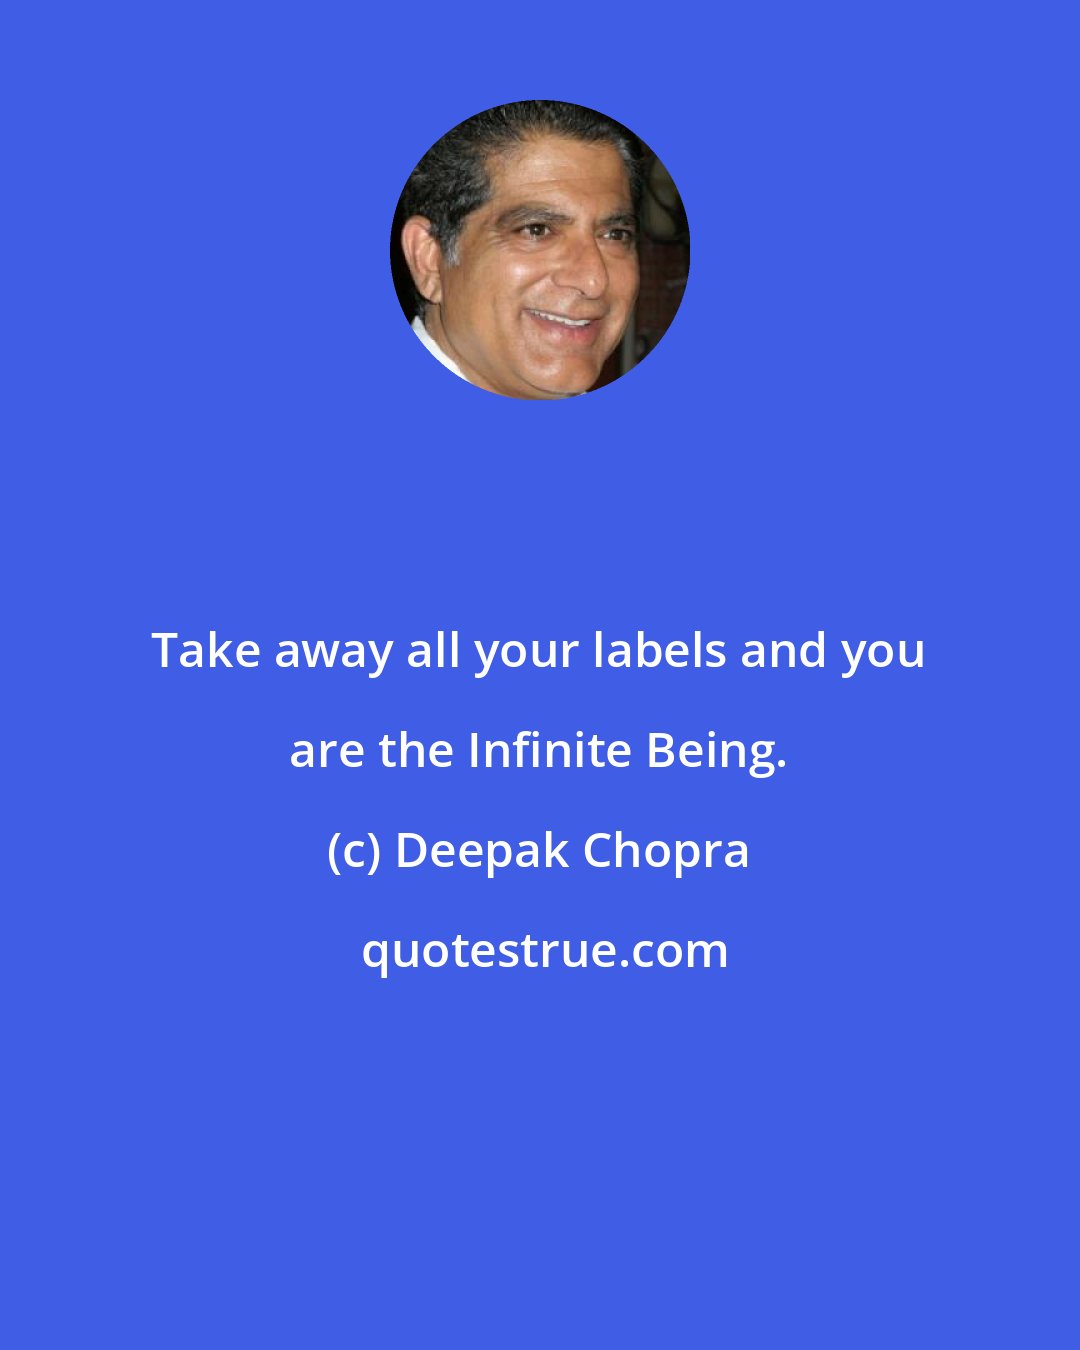 Deepak Chopra: Take away all your labels and you are the Infinite Being.